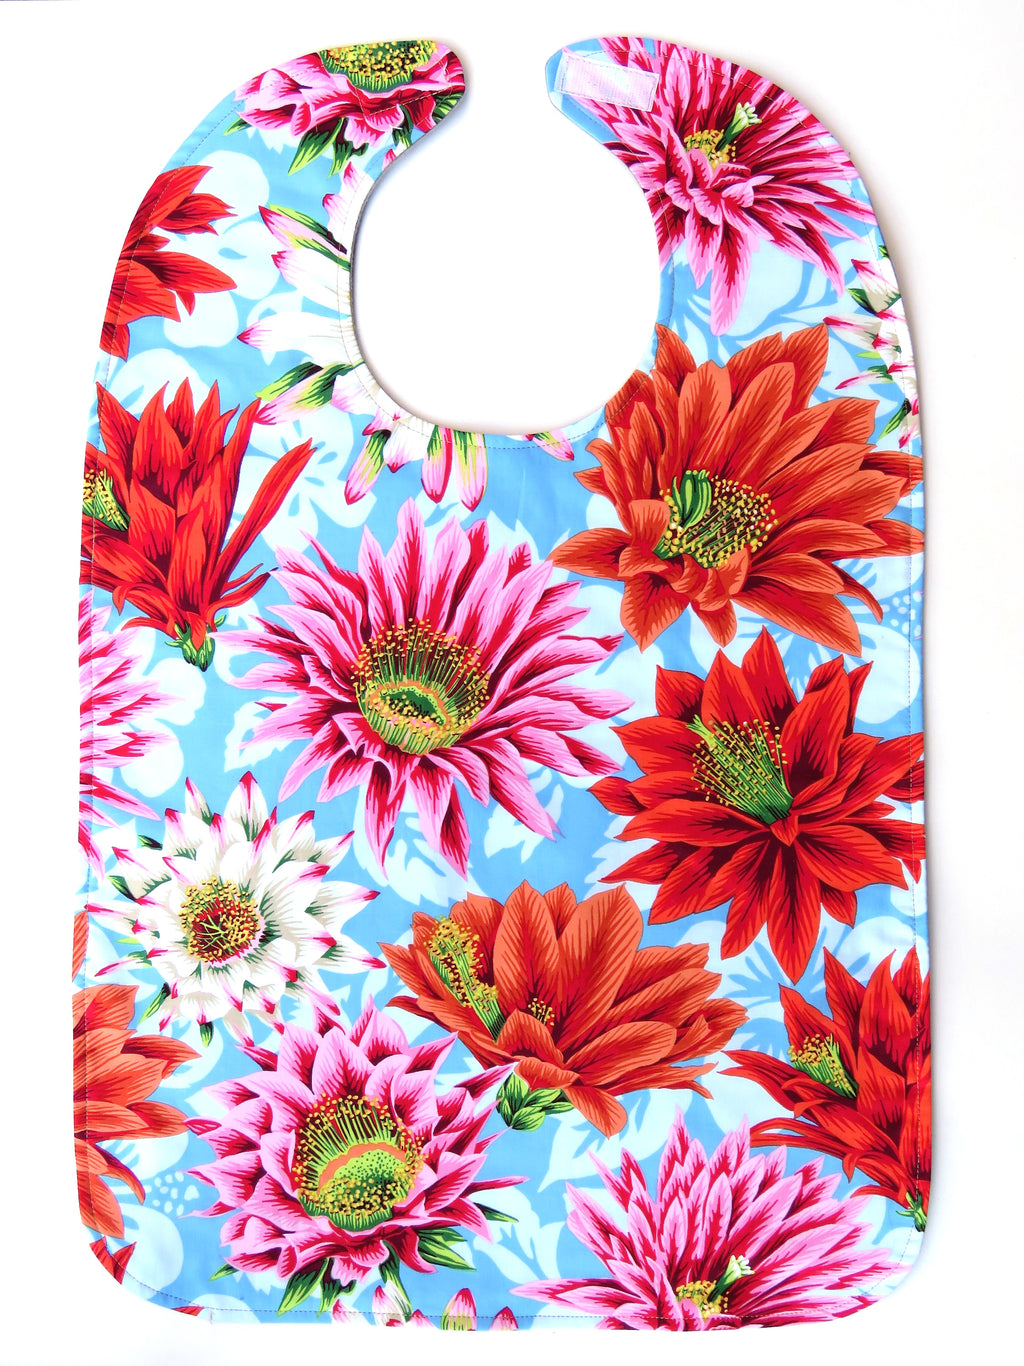 BAVETTE 100% cotton adult bib, pink, red and white cactus flower design